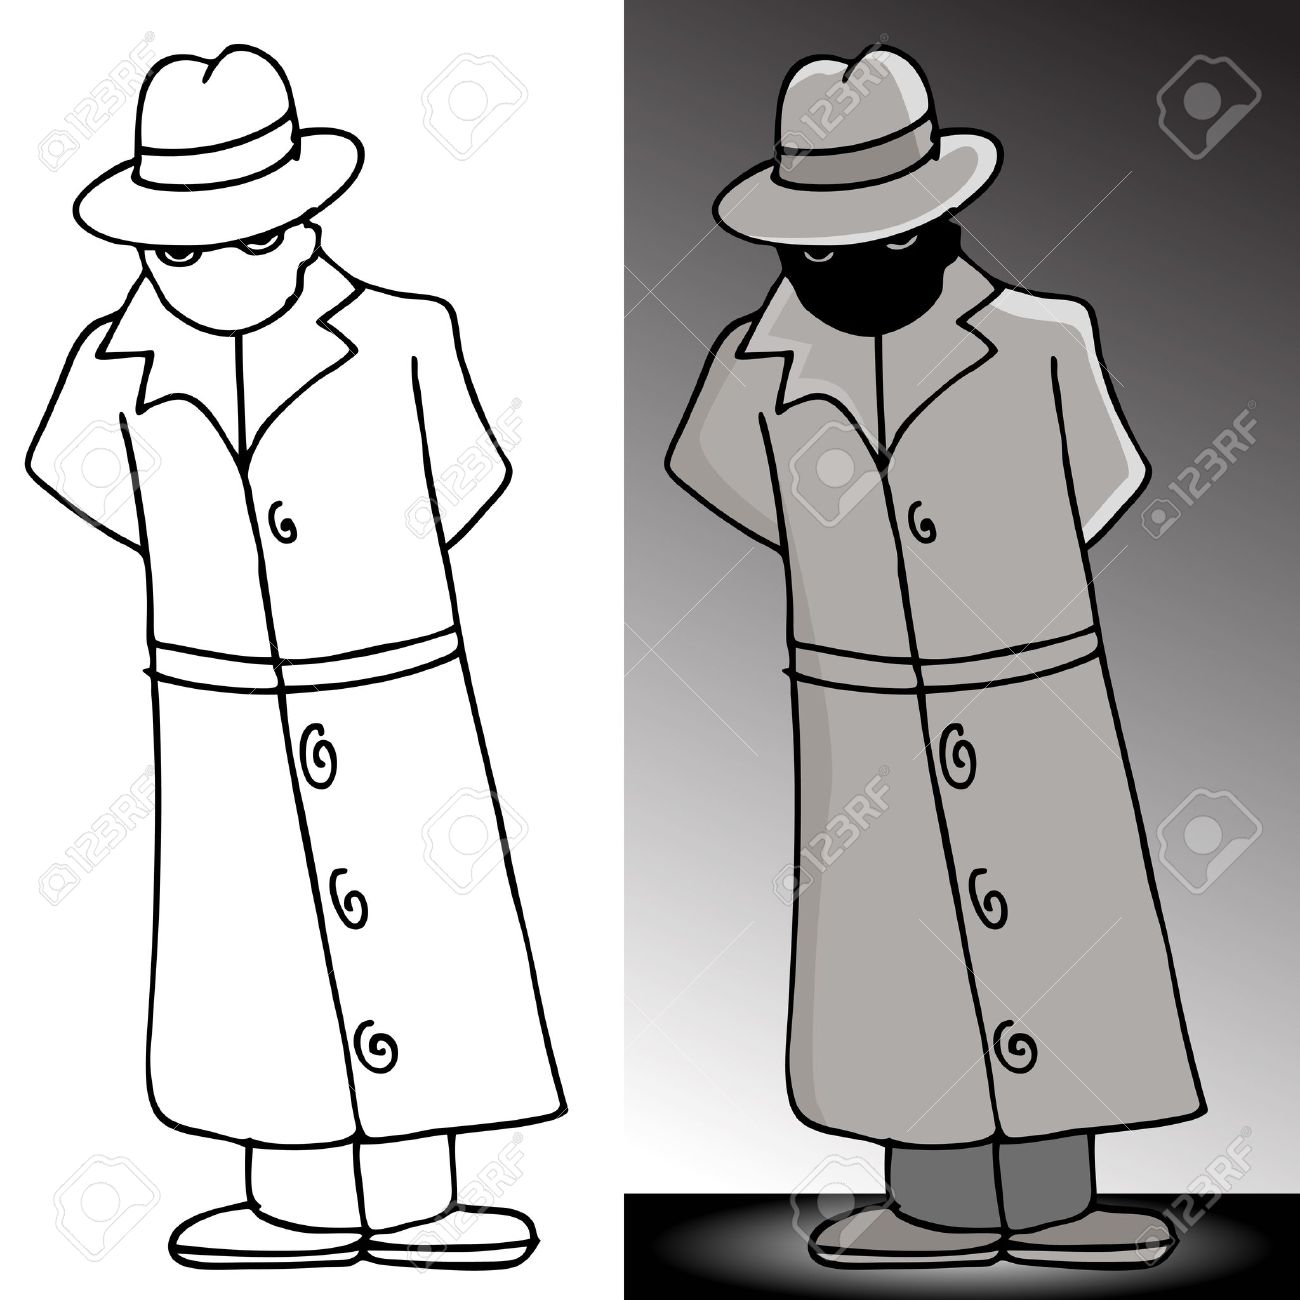 Spy Man Clipart Black And White.